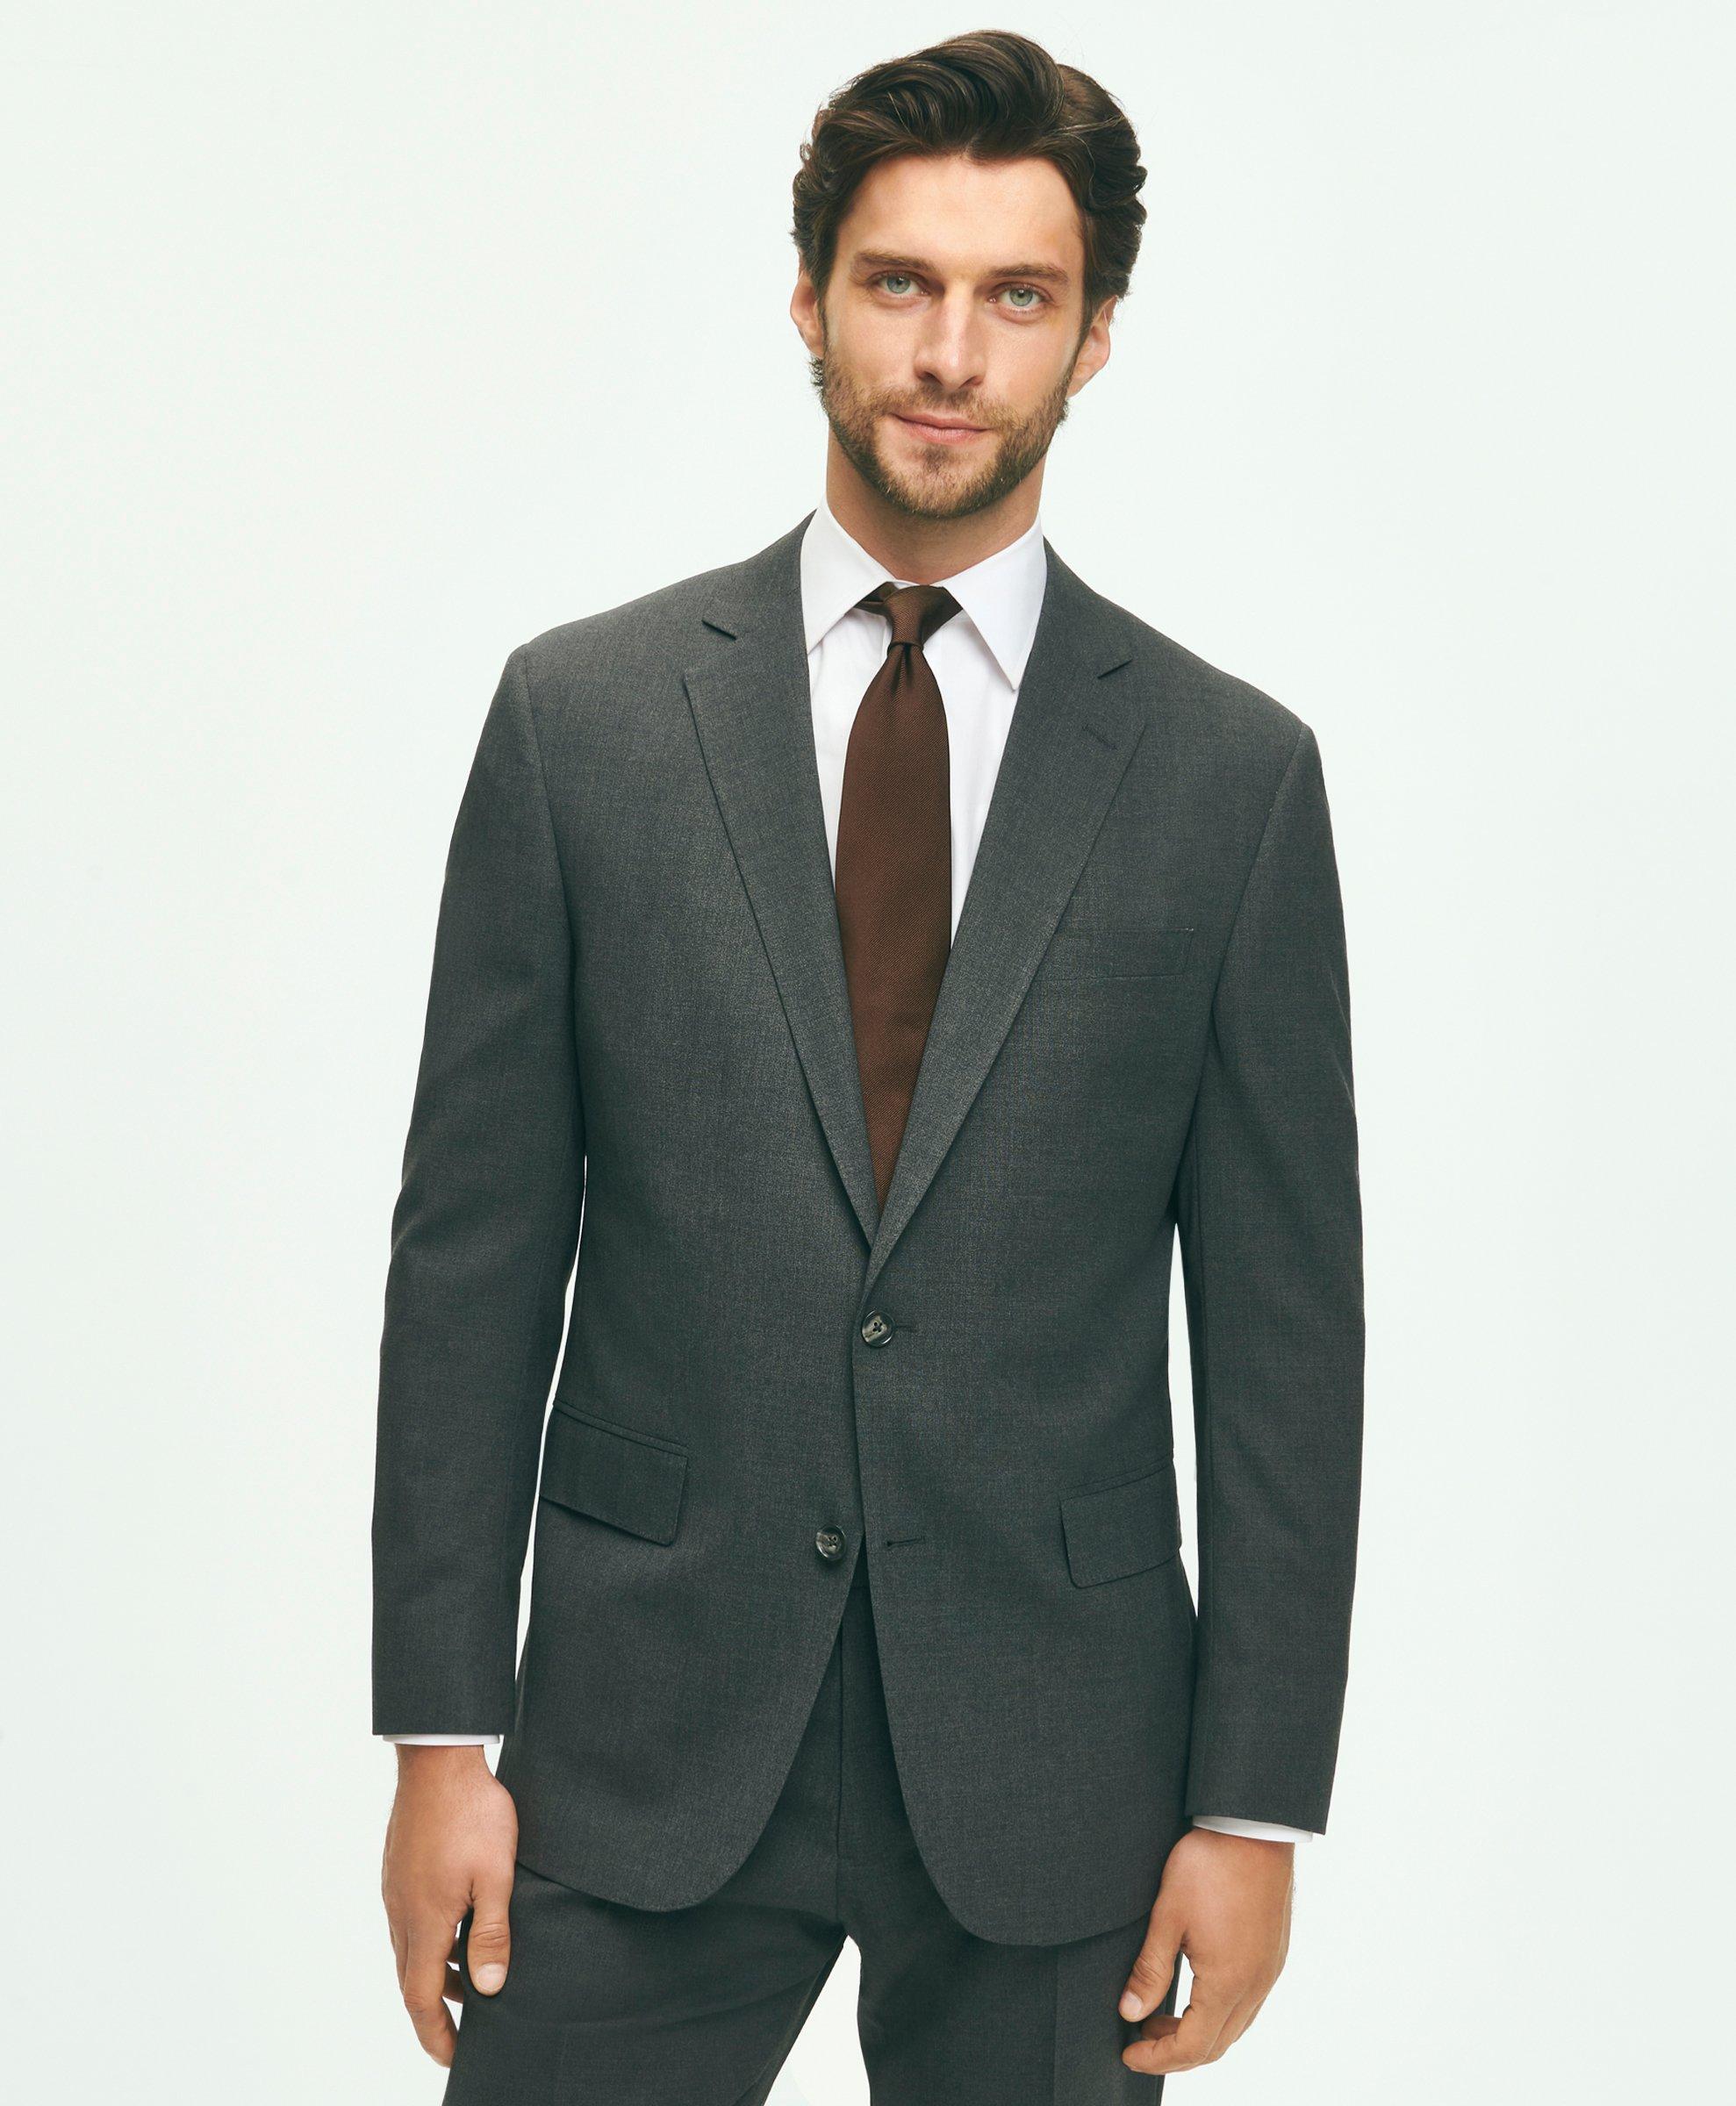 Brooks Brothers Explorer Collection Classic Fit Wool Suit Jacket | Grey | Size 38 Regular